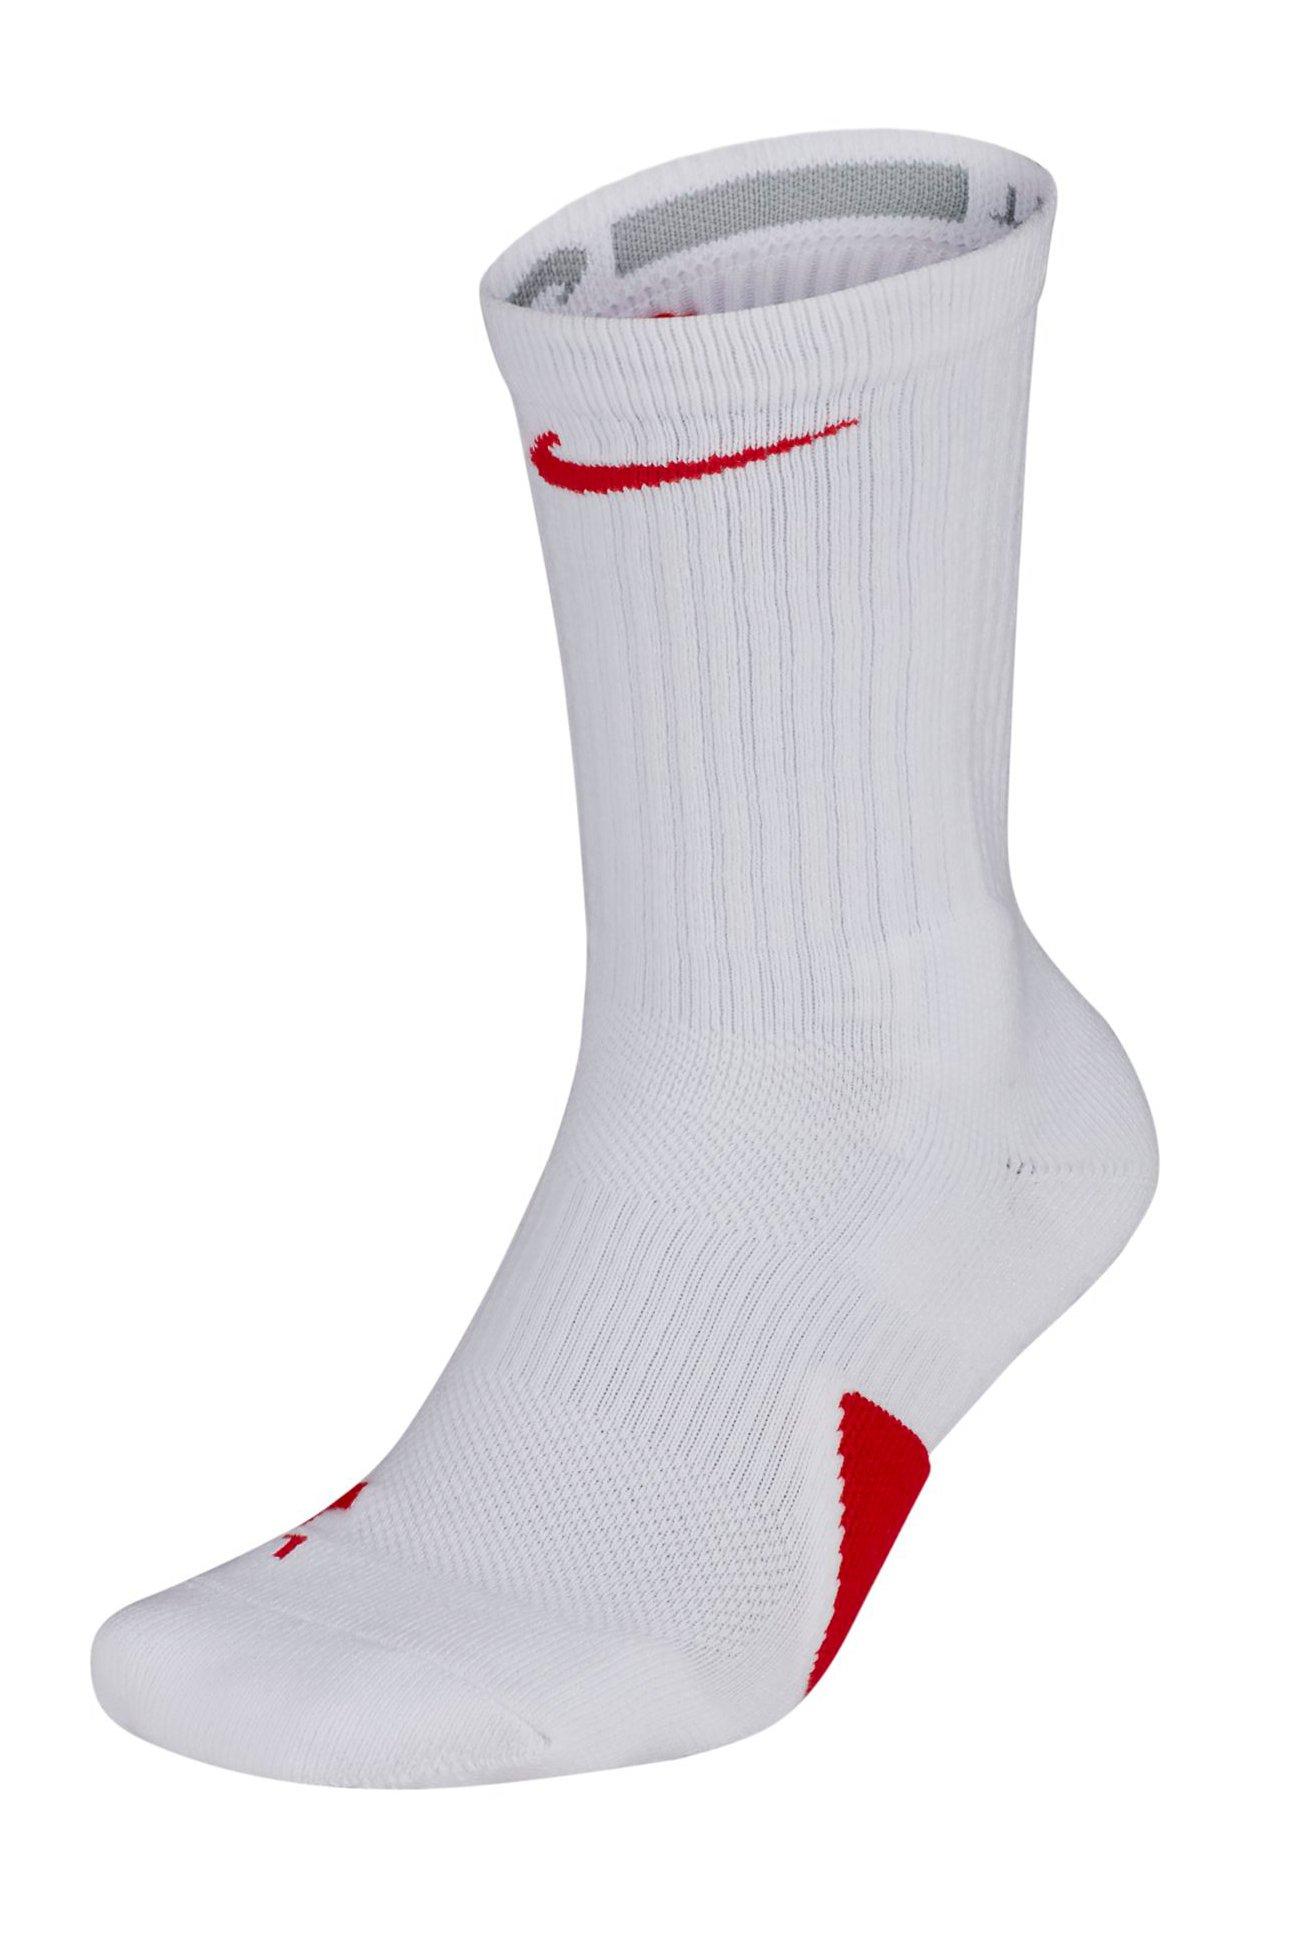 nike socks with logo on front